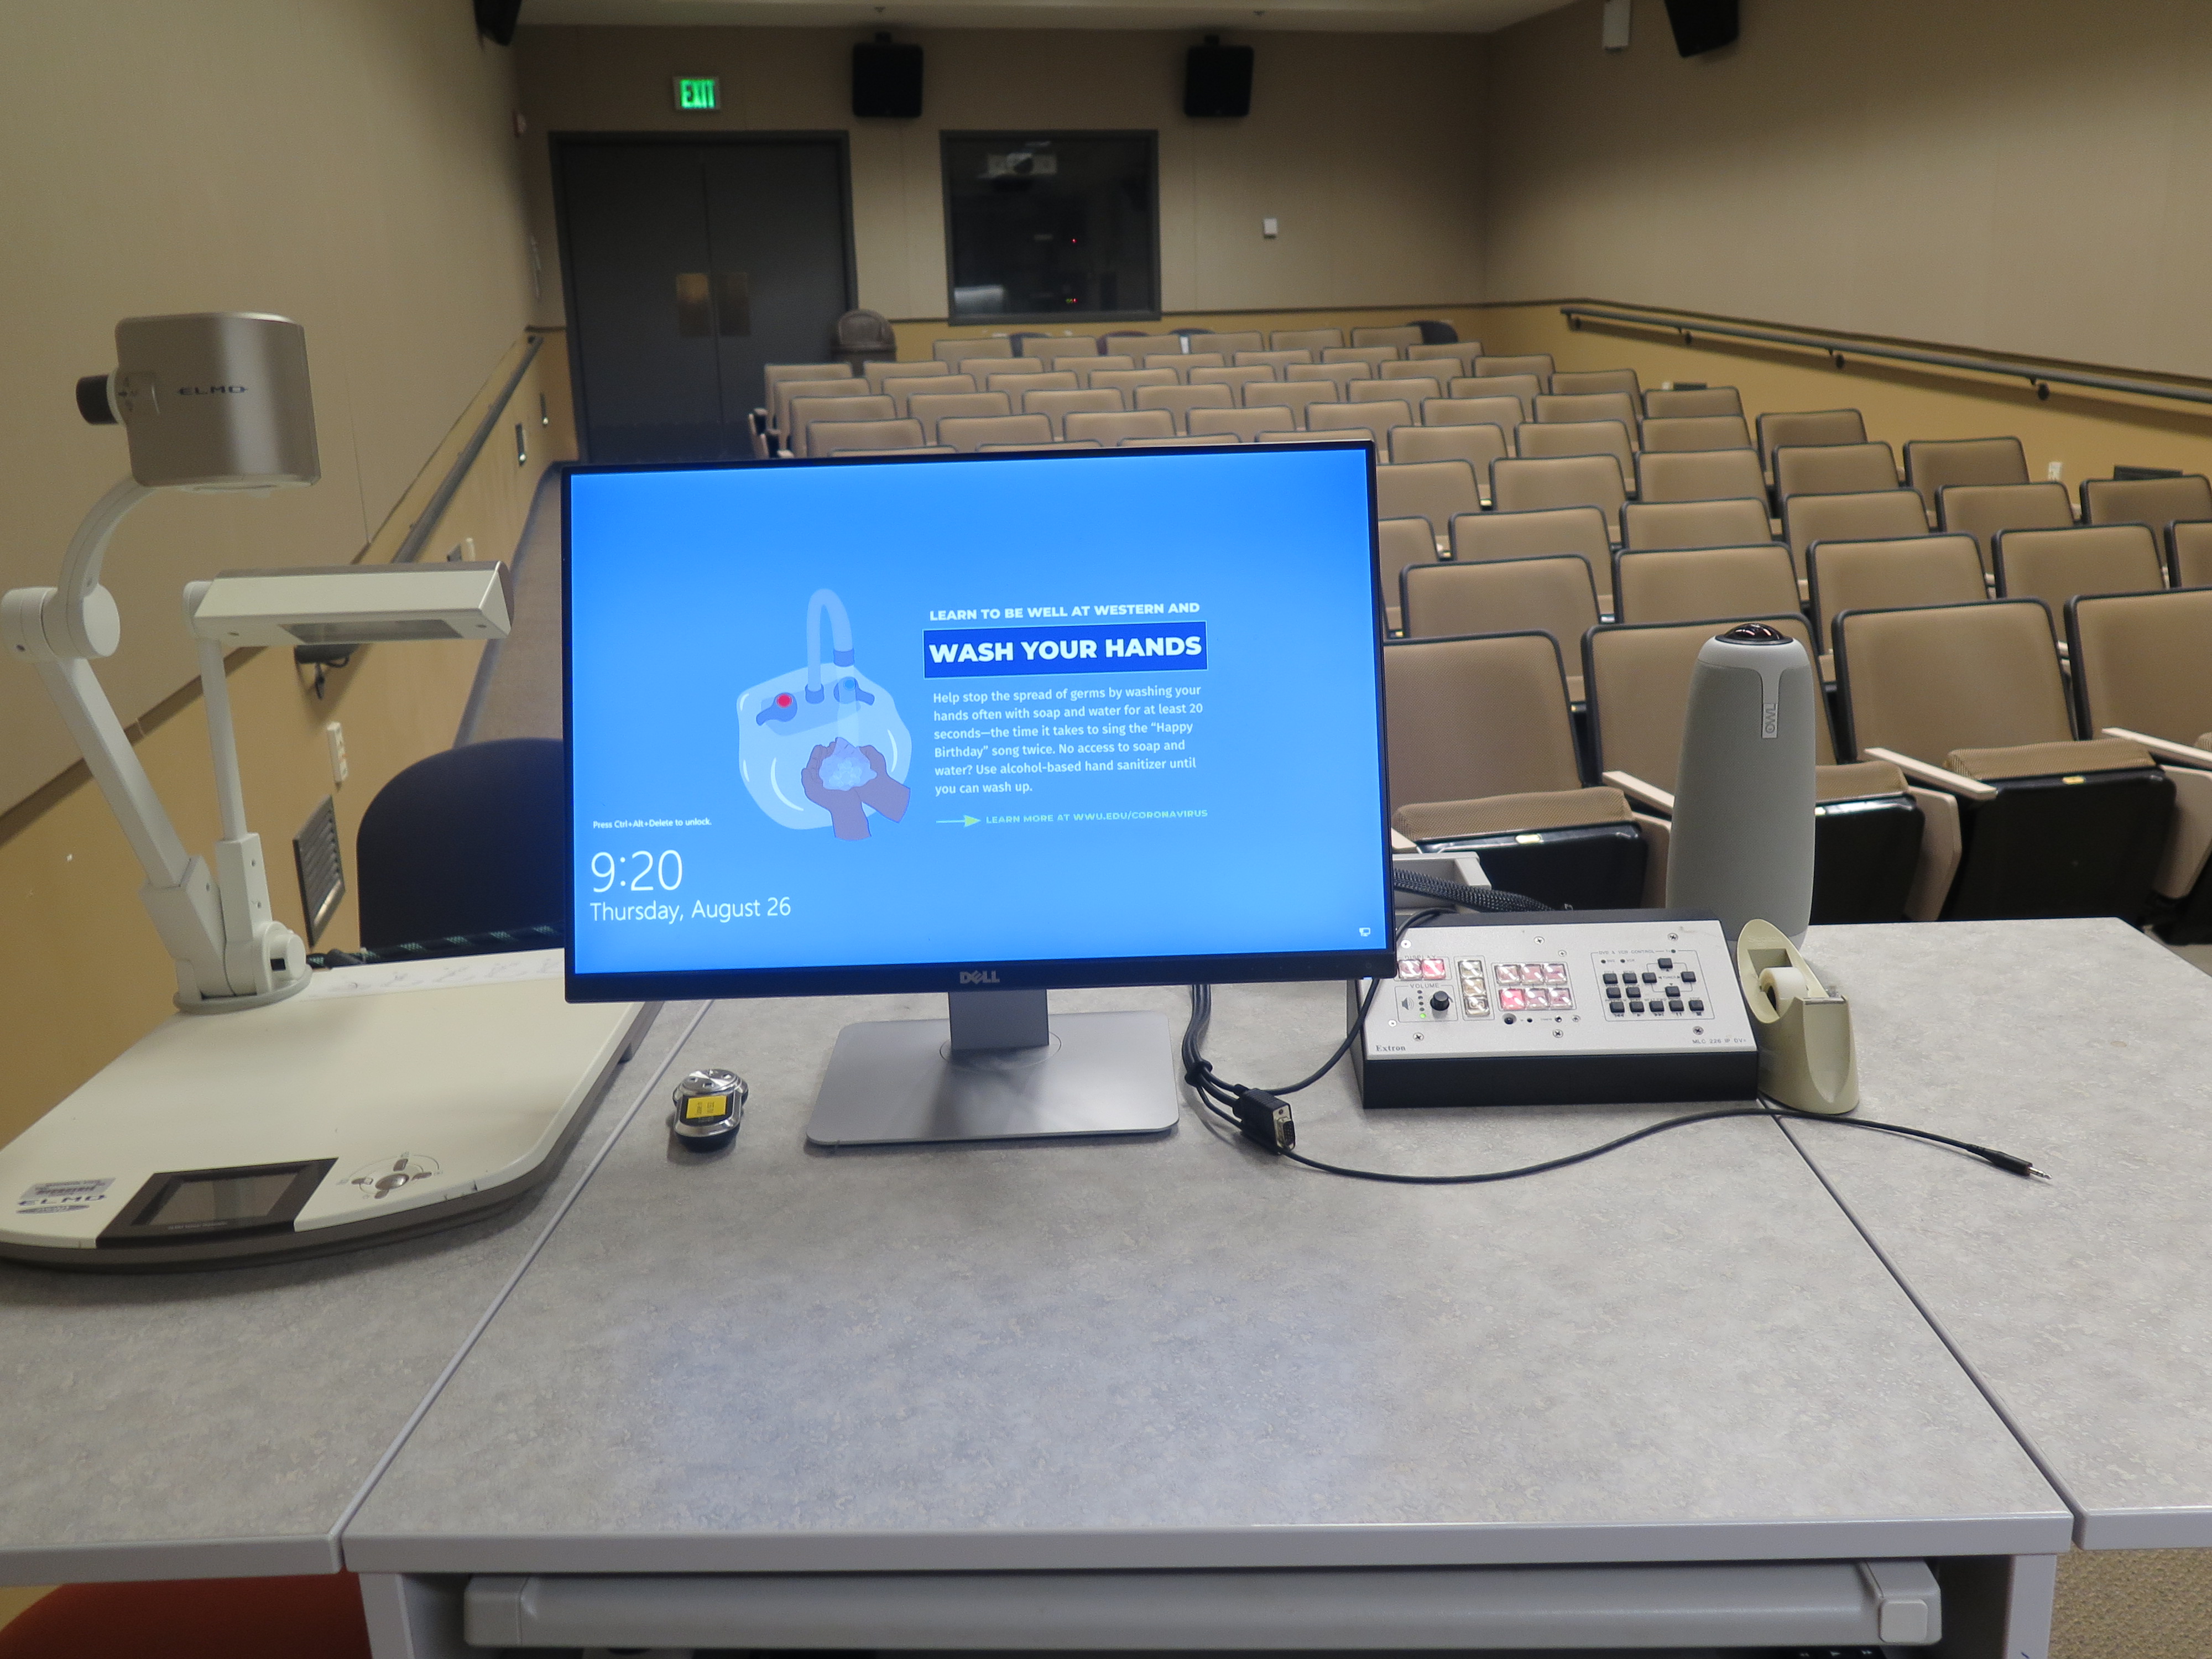 On top of Podium is Owl webcam, Dell Computer Monitor, AV Push Button Controller, and Elmo Document Camera.